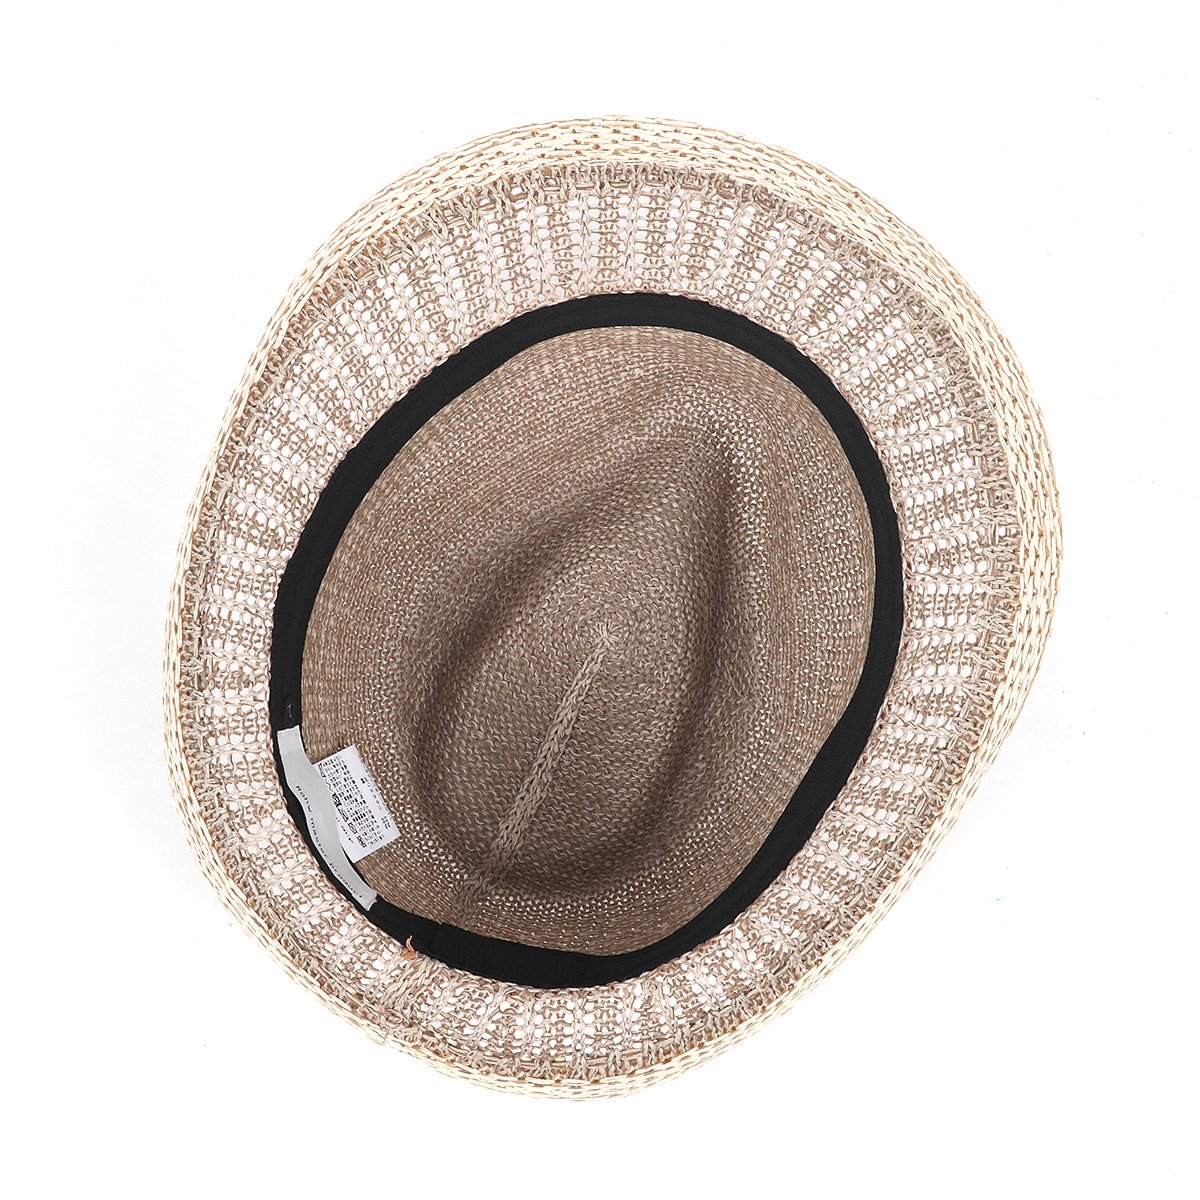 COMBINATION STRAW THERMO HAT